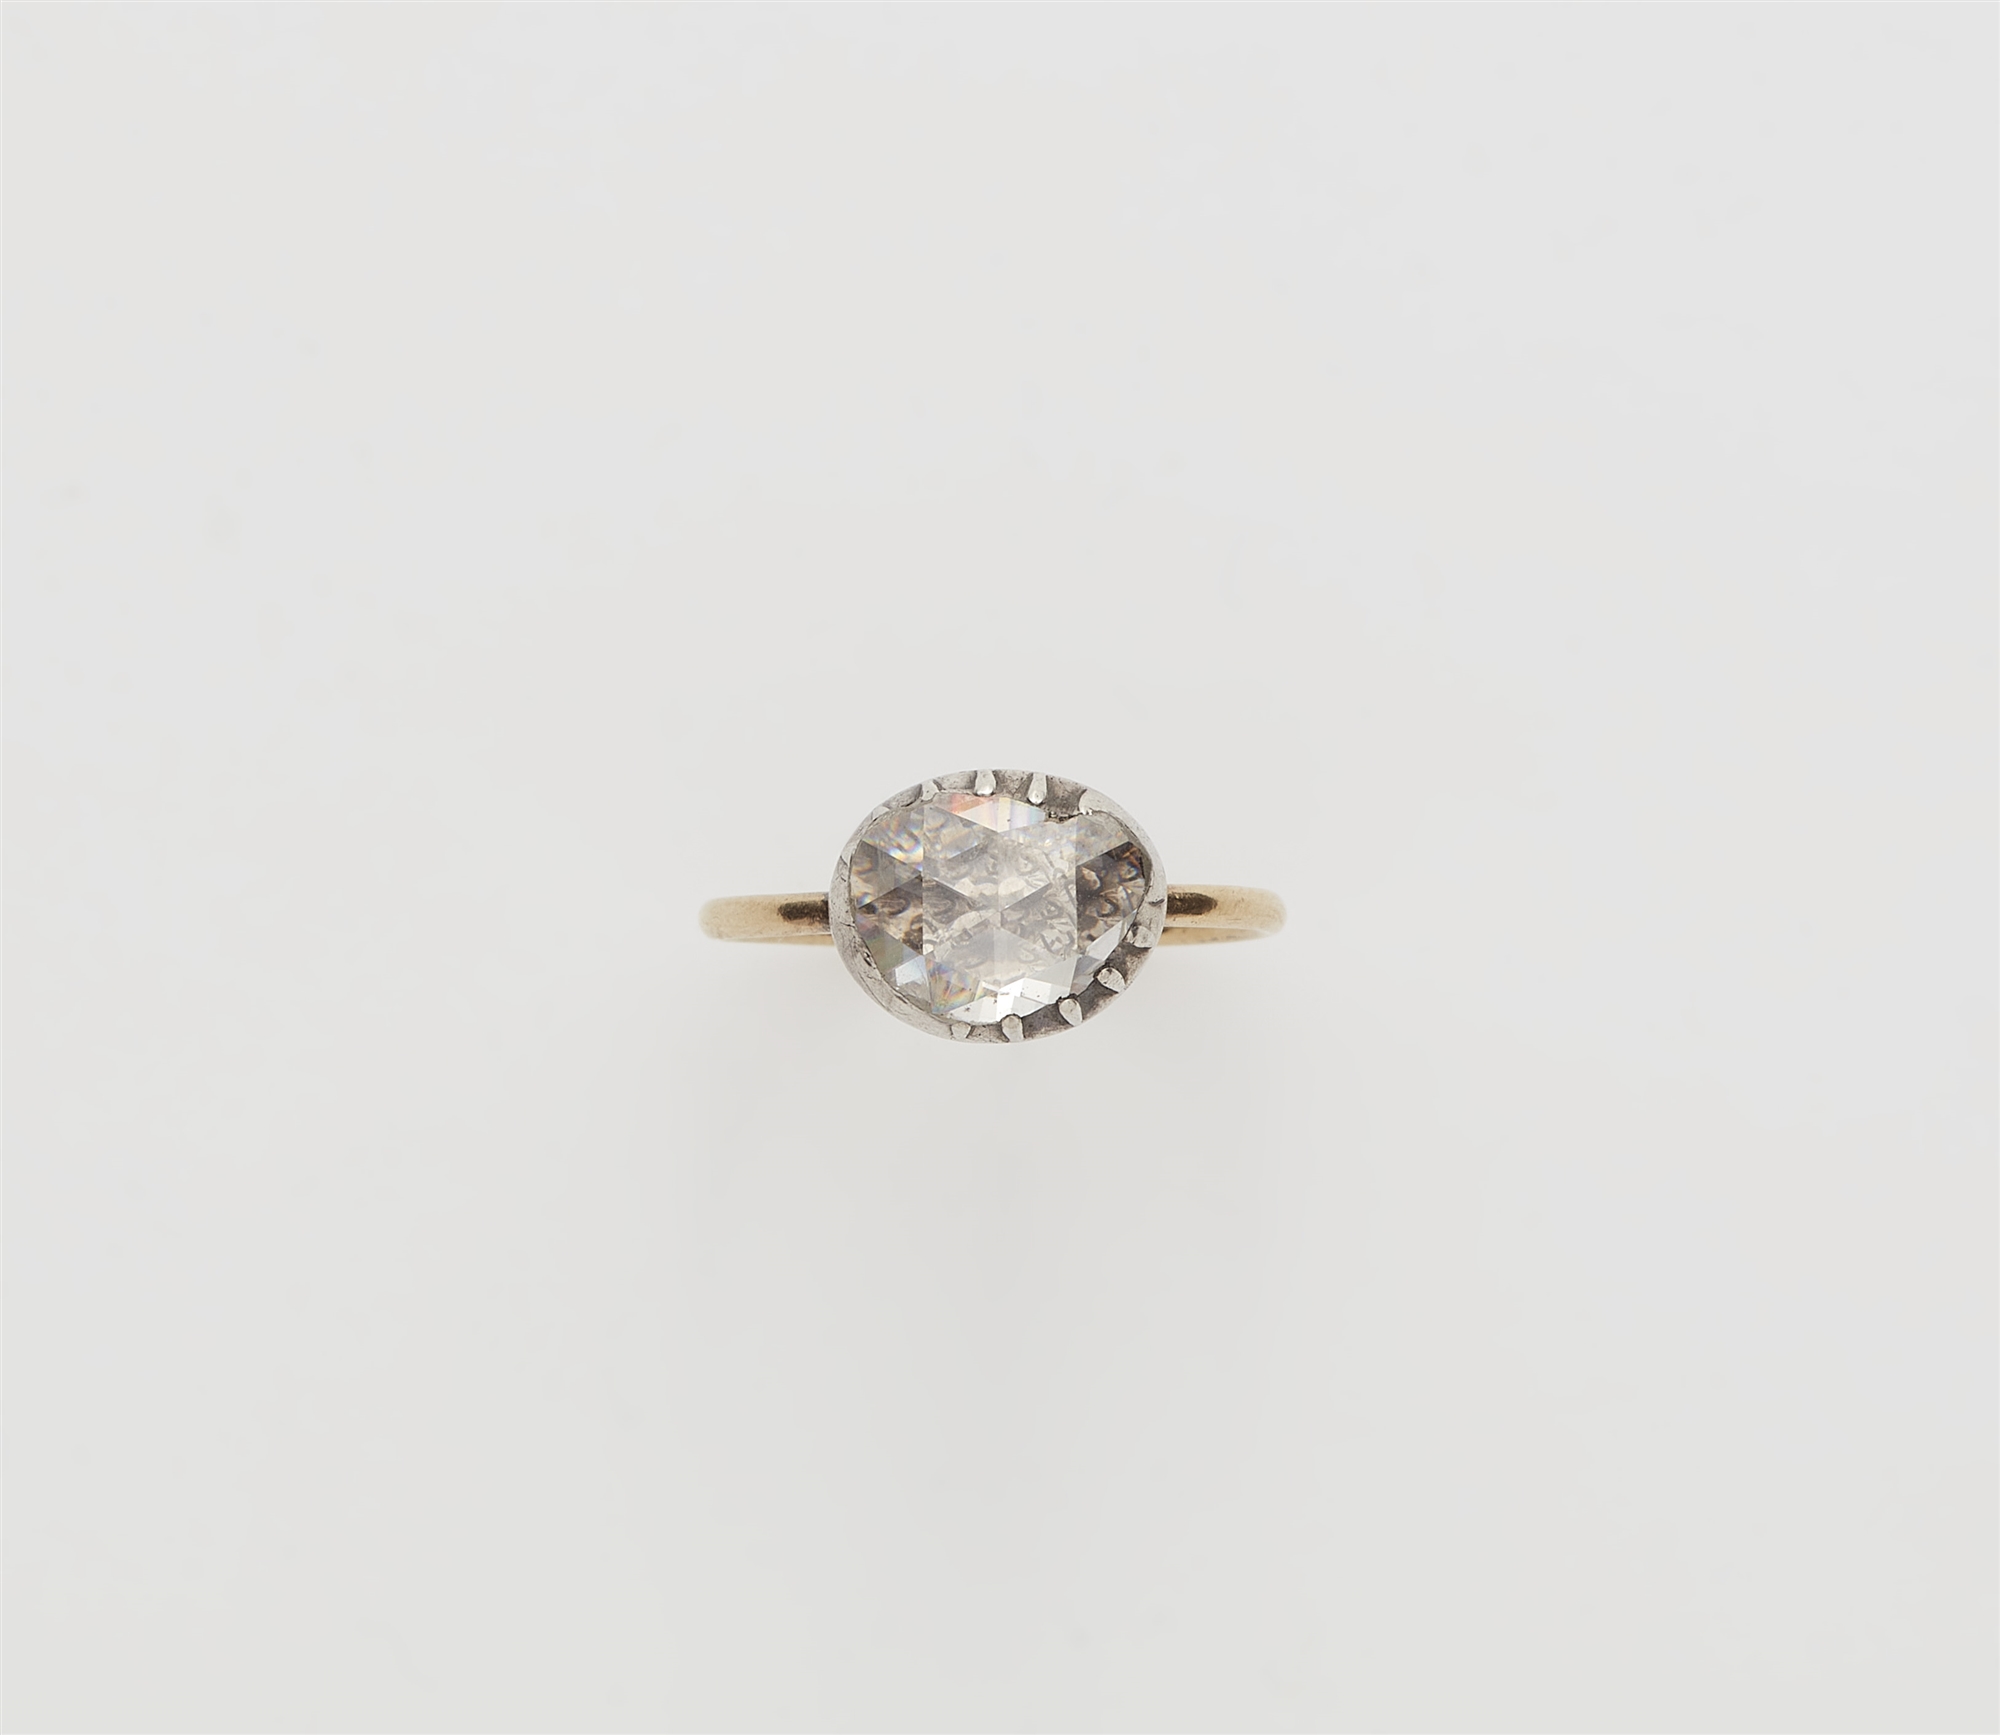 A George III 14k gold silver and rose-cut diamond solitaire ring.